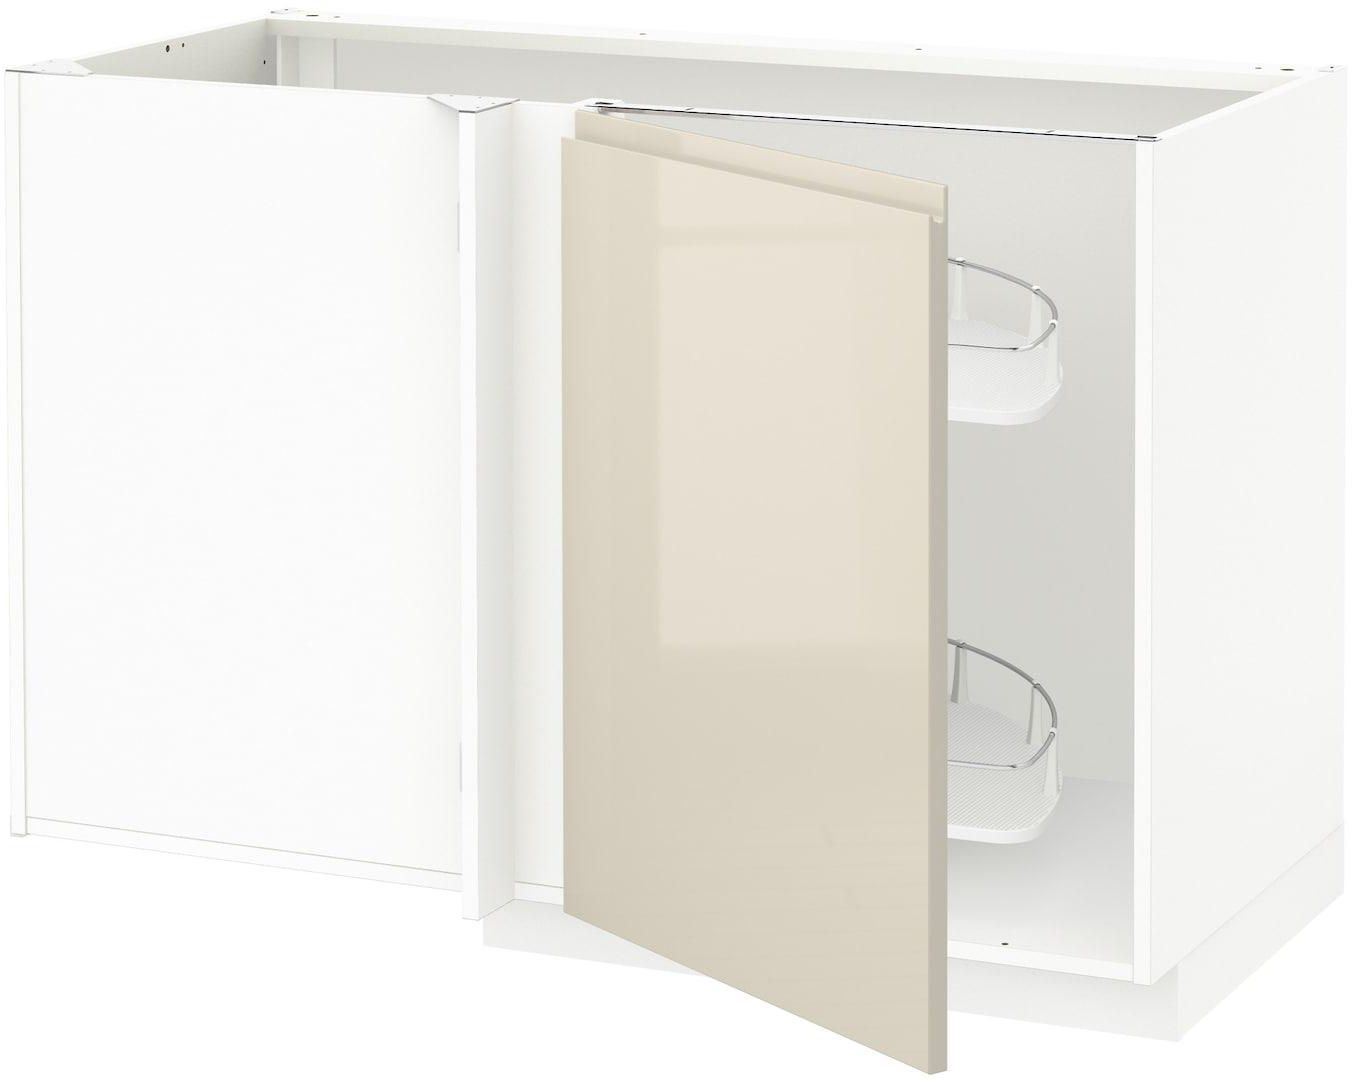 METOD Corner base cab w pull-out fitting - white/Voxtorp high-gloss light beige 128x68 cm